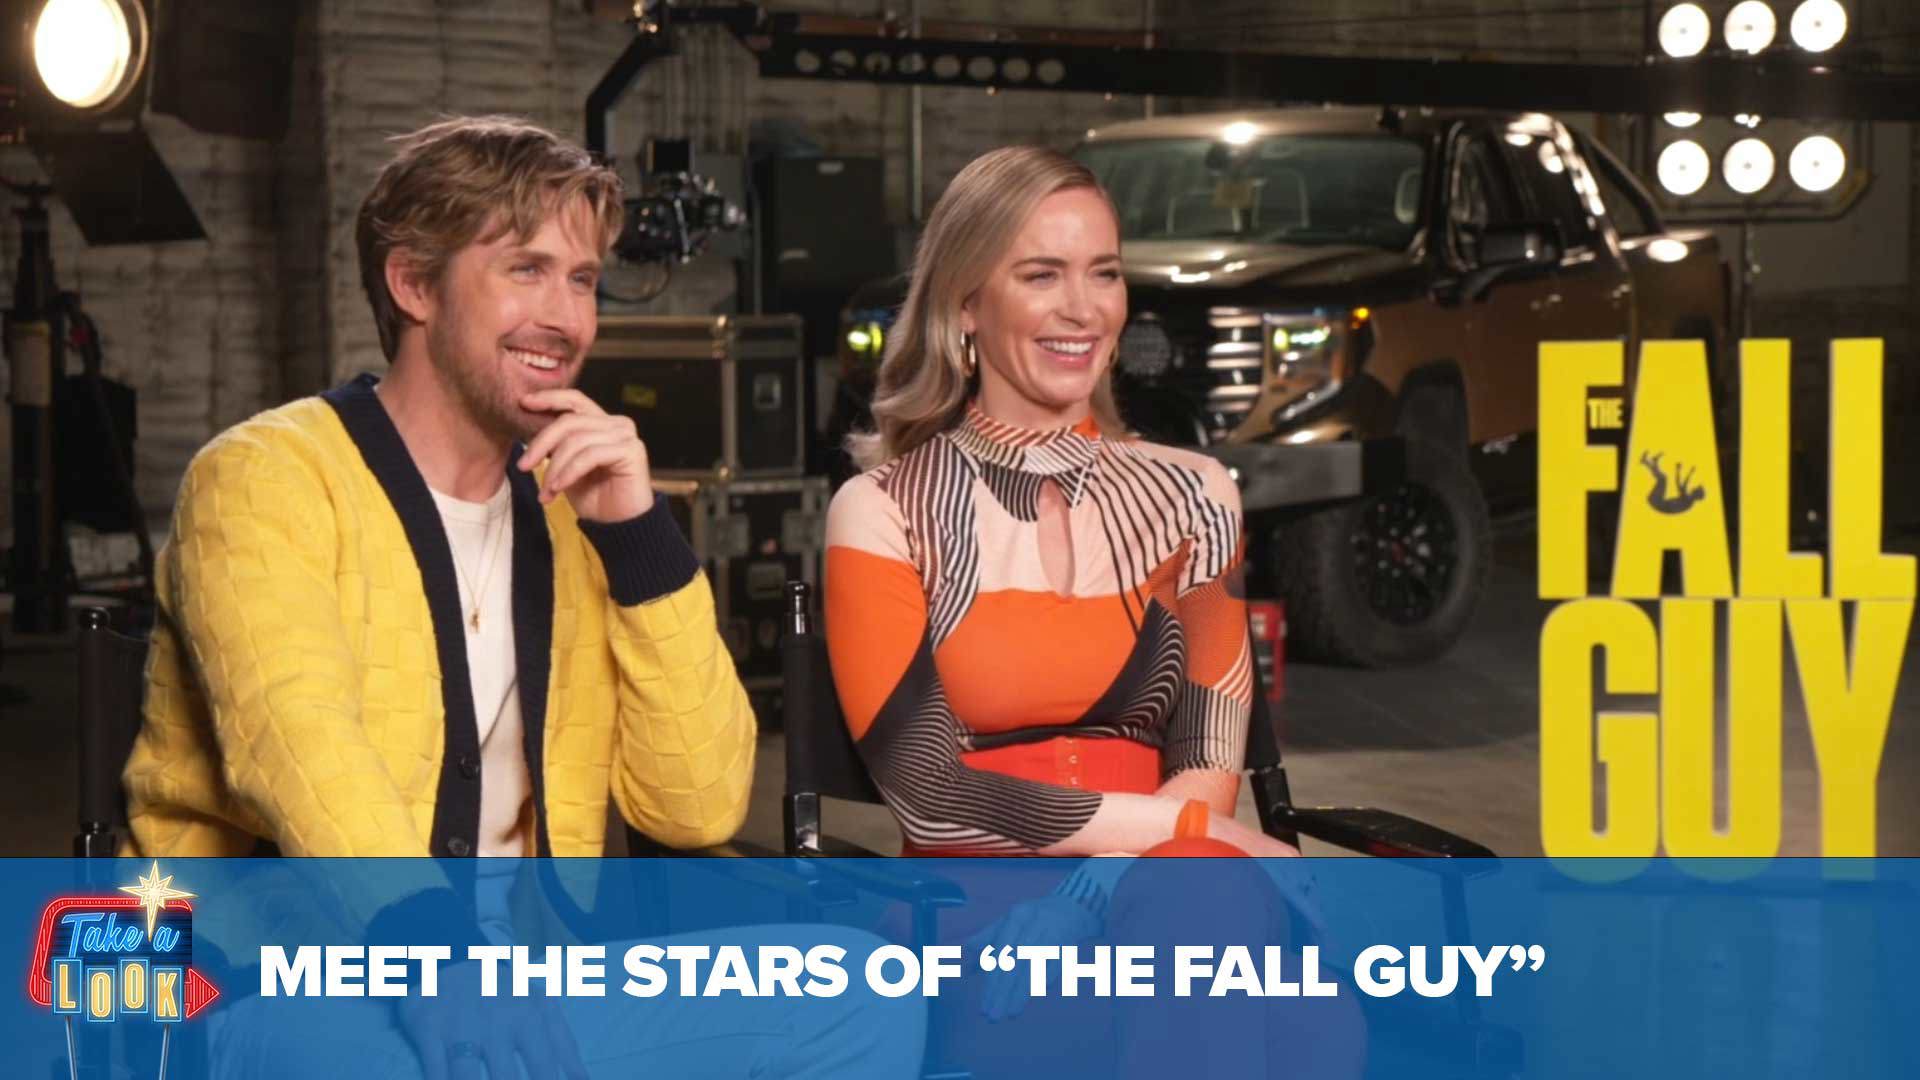 This week on “Take a Look” with Mark S. Allen: Mark talks with the stars of “The Fall Guy,” including Ryan Gosling and Emily Blunt. Plus, we’ll go behind the scenes.